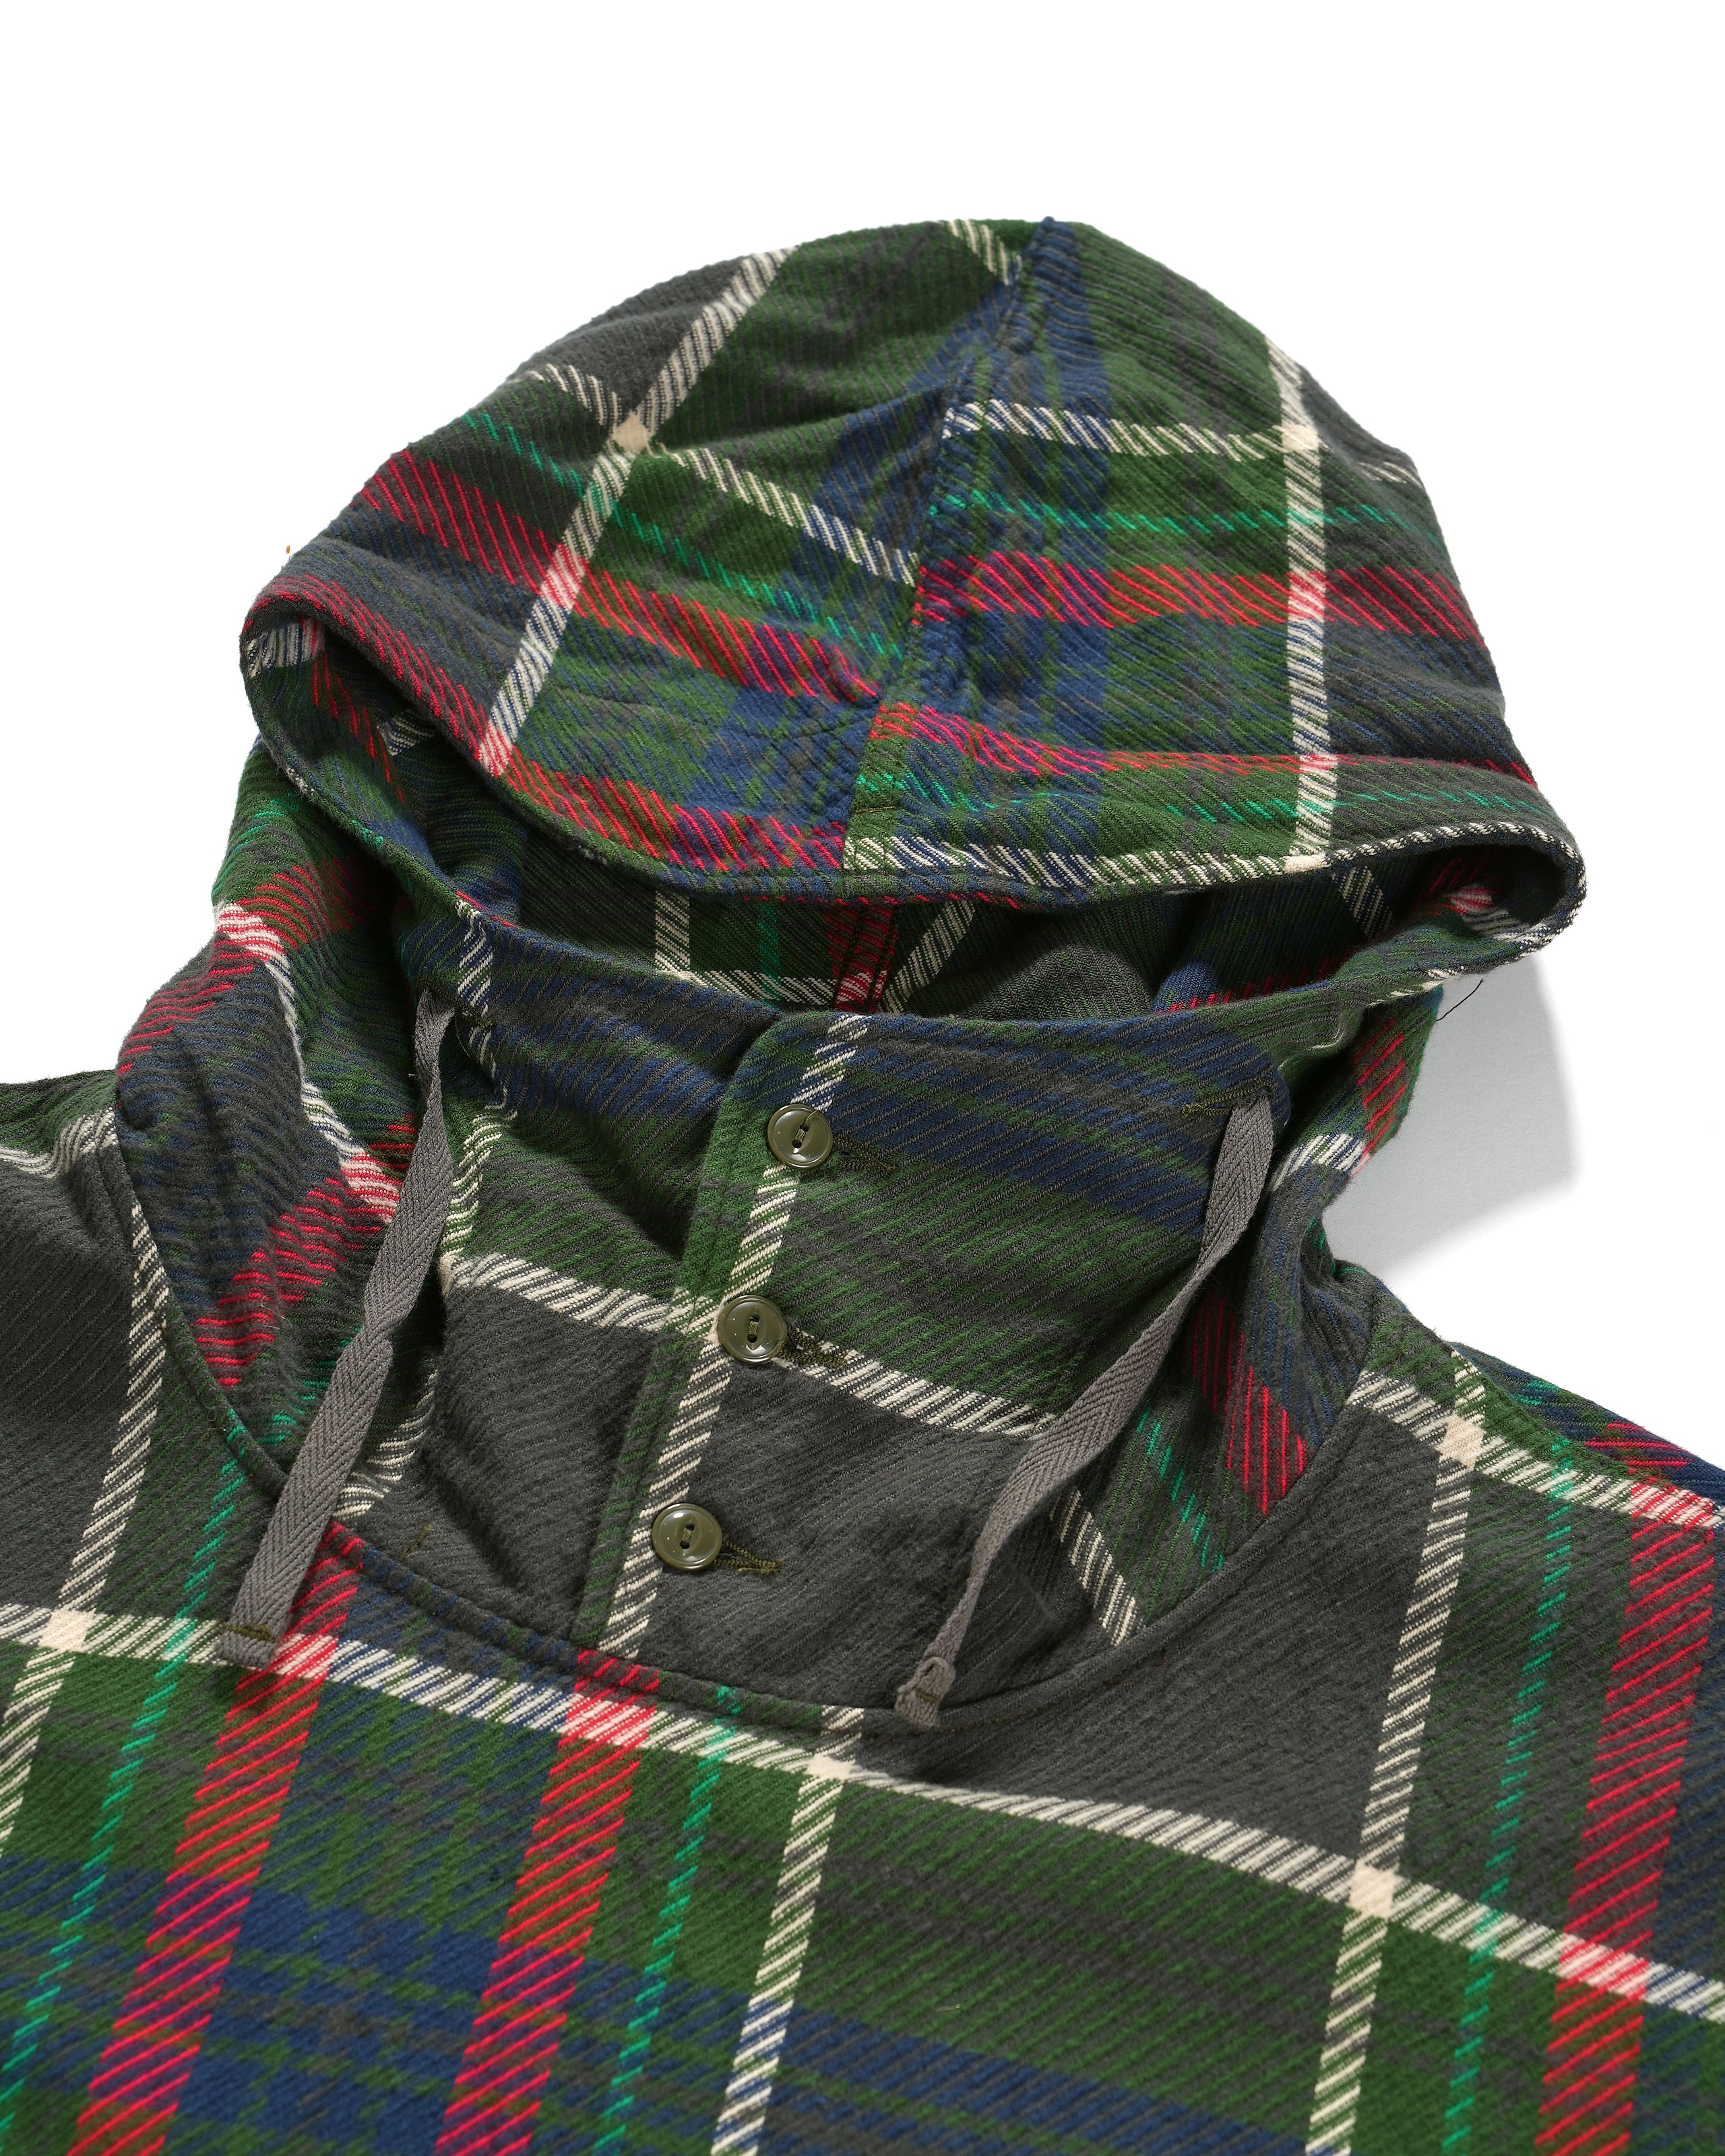 Cagoule Shirt - Olive Cotton Heavy Twill Plaid